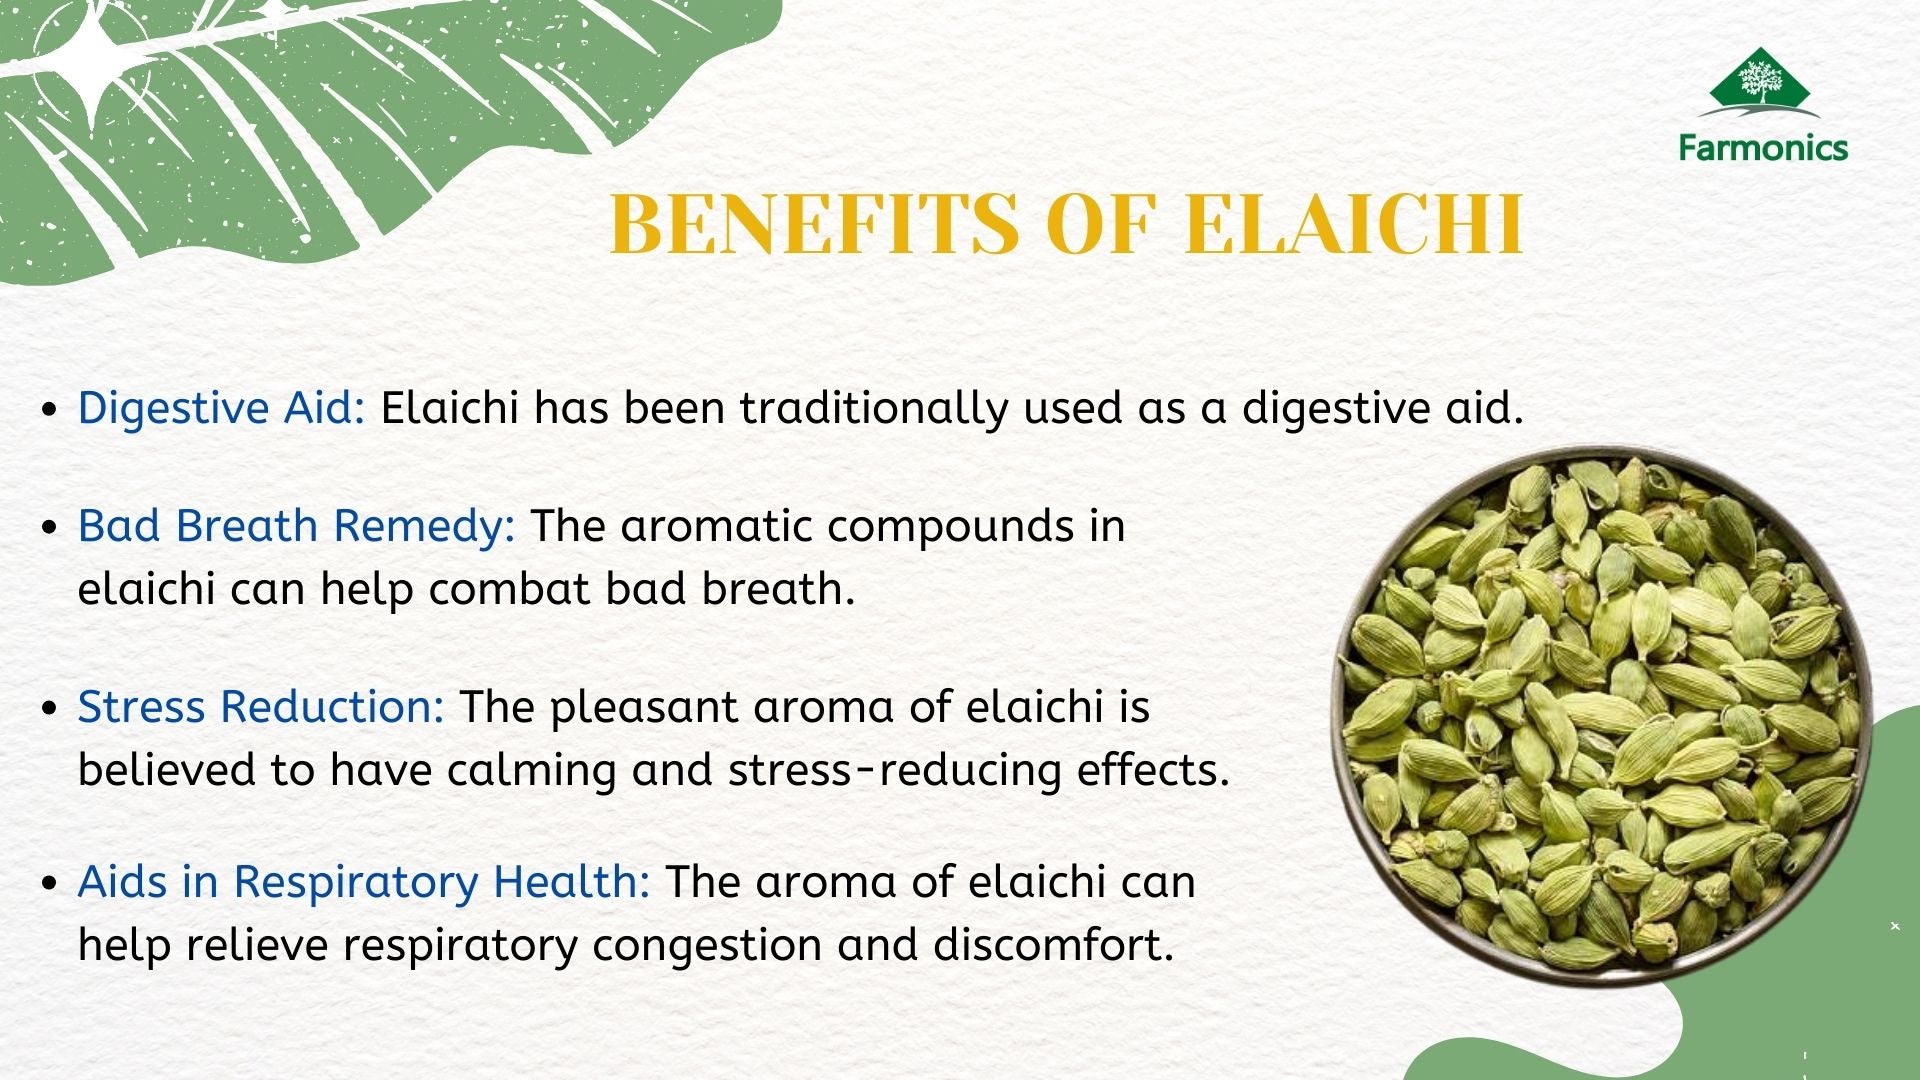 here are the list of benefits of elaichi from farmonics